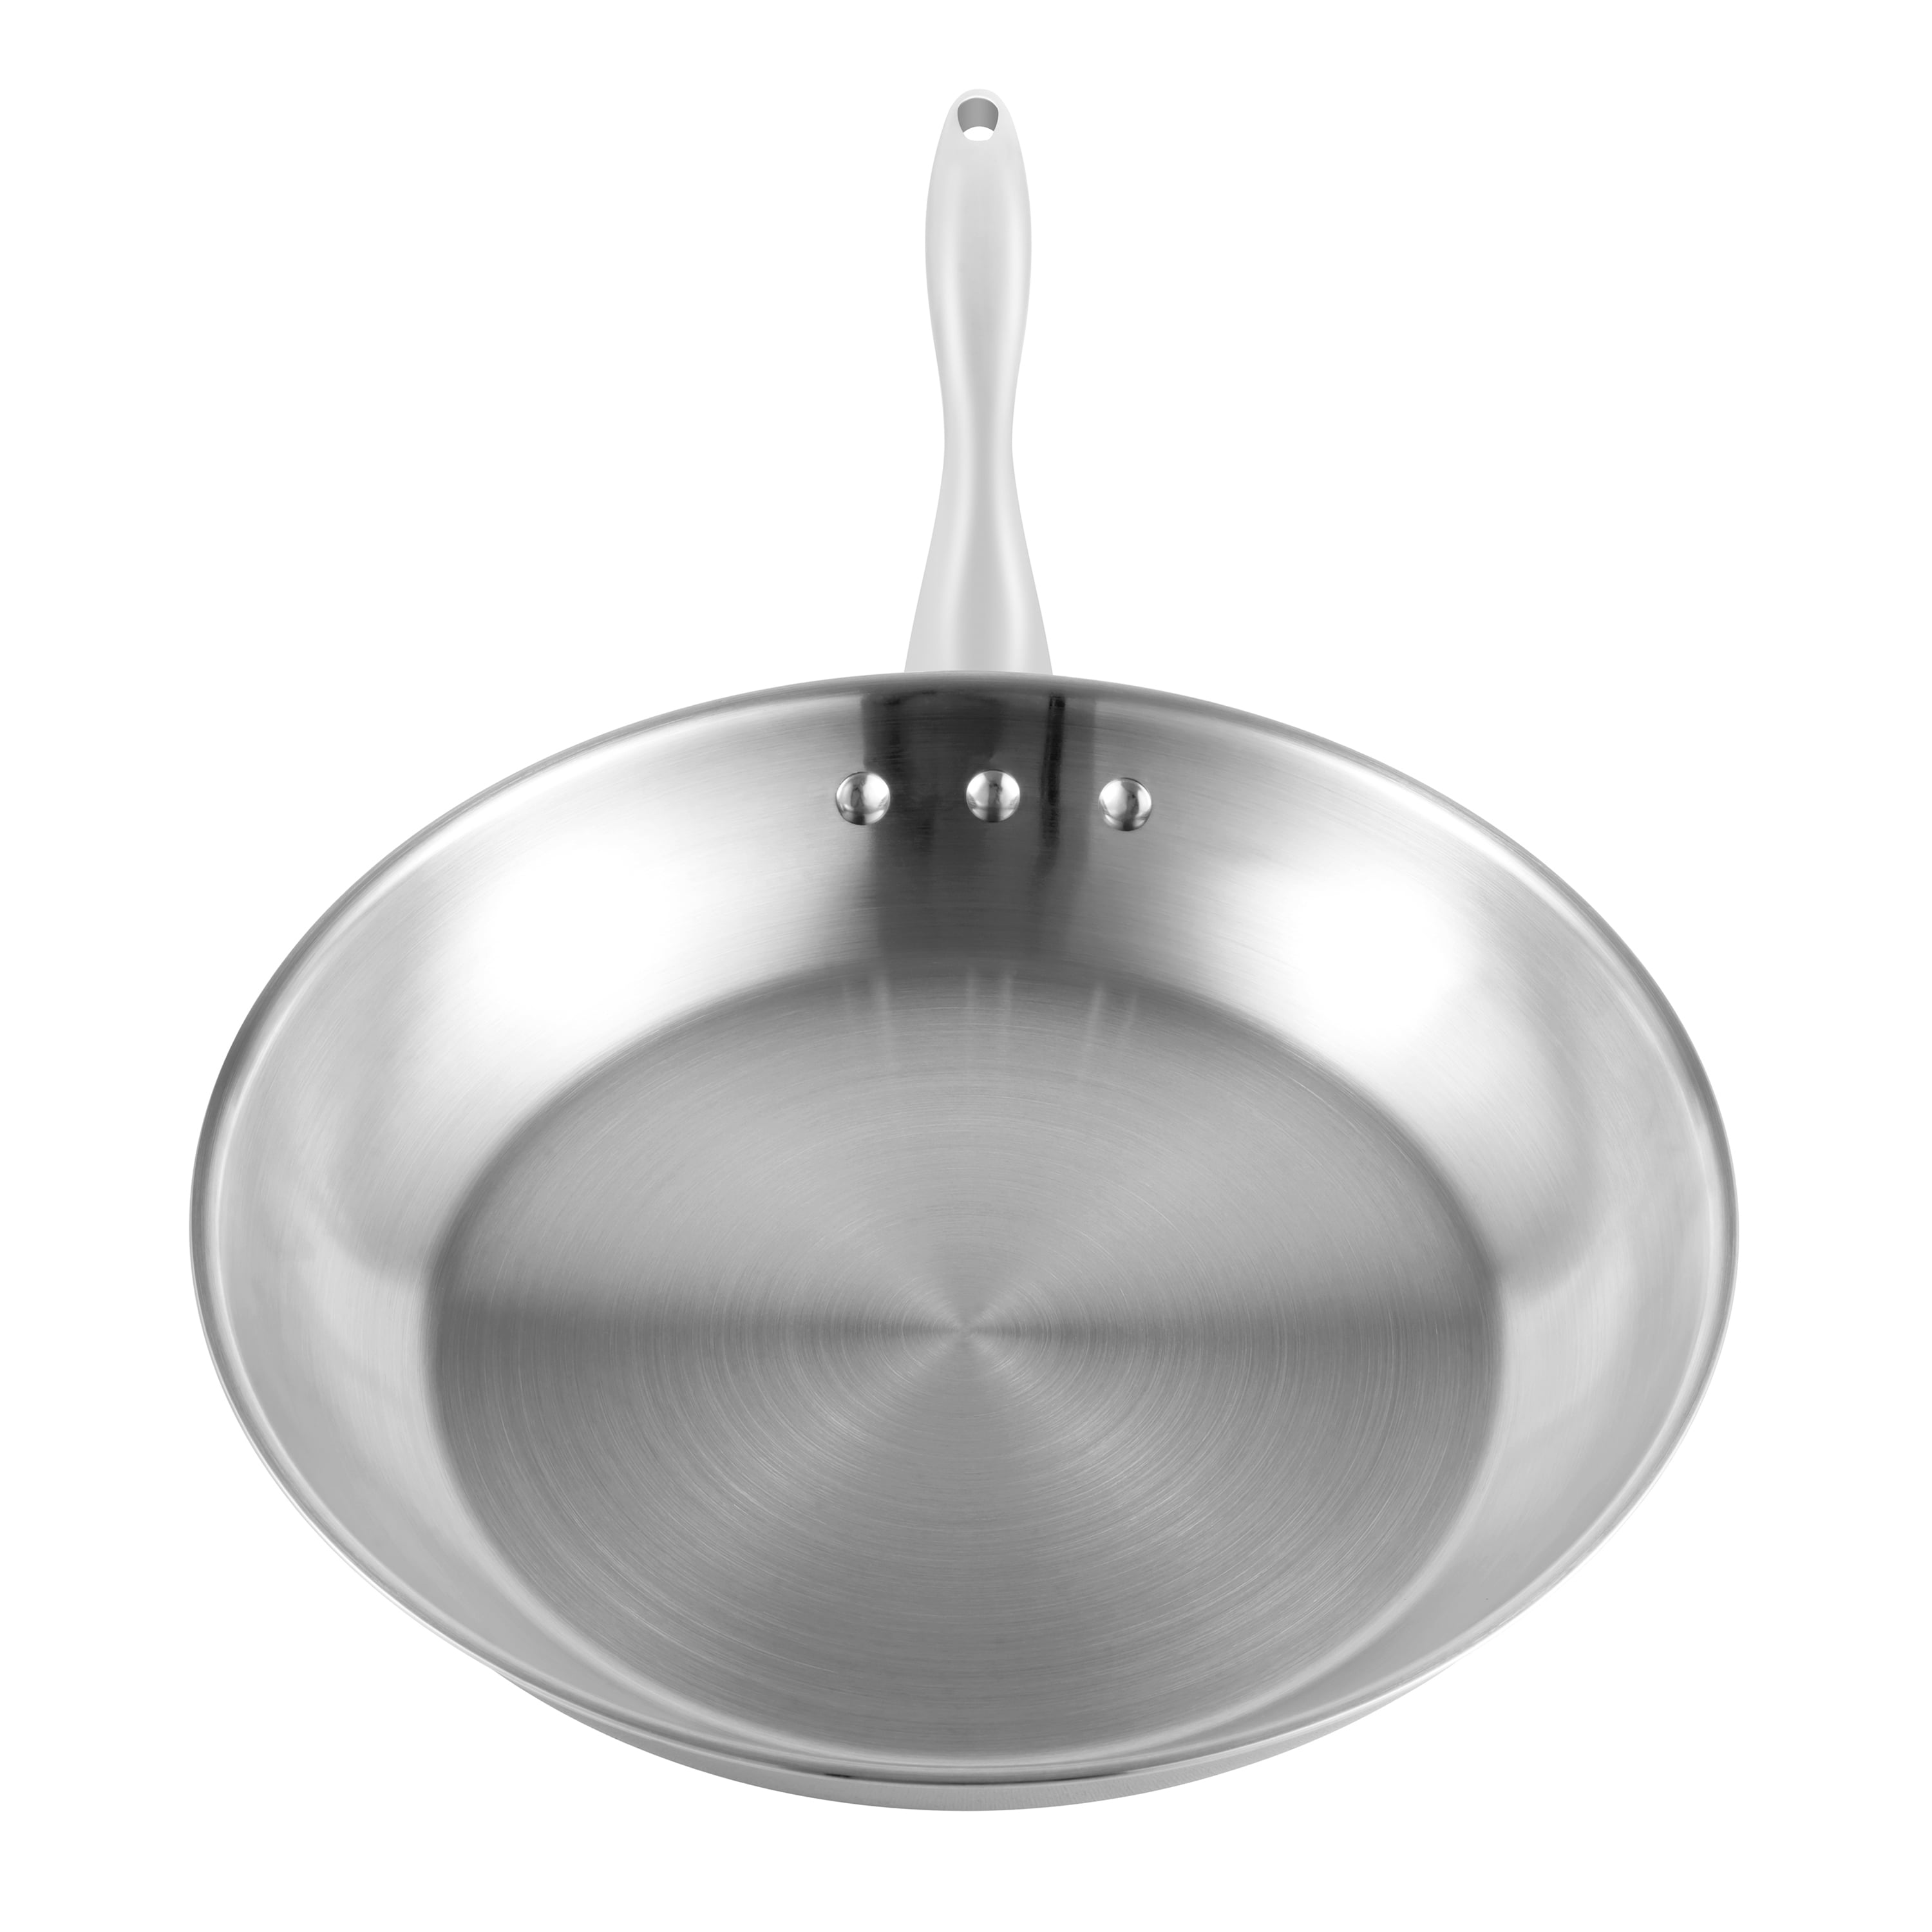 Professional Series Stainless Steel Frying Pan by Ozeri, 100% PTFE-Free  Restaurant Edition,, 1 - Fry's Food Stores